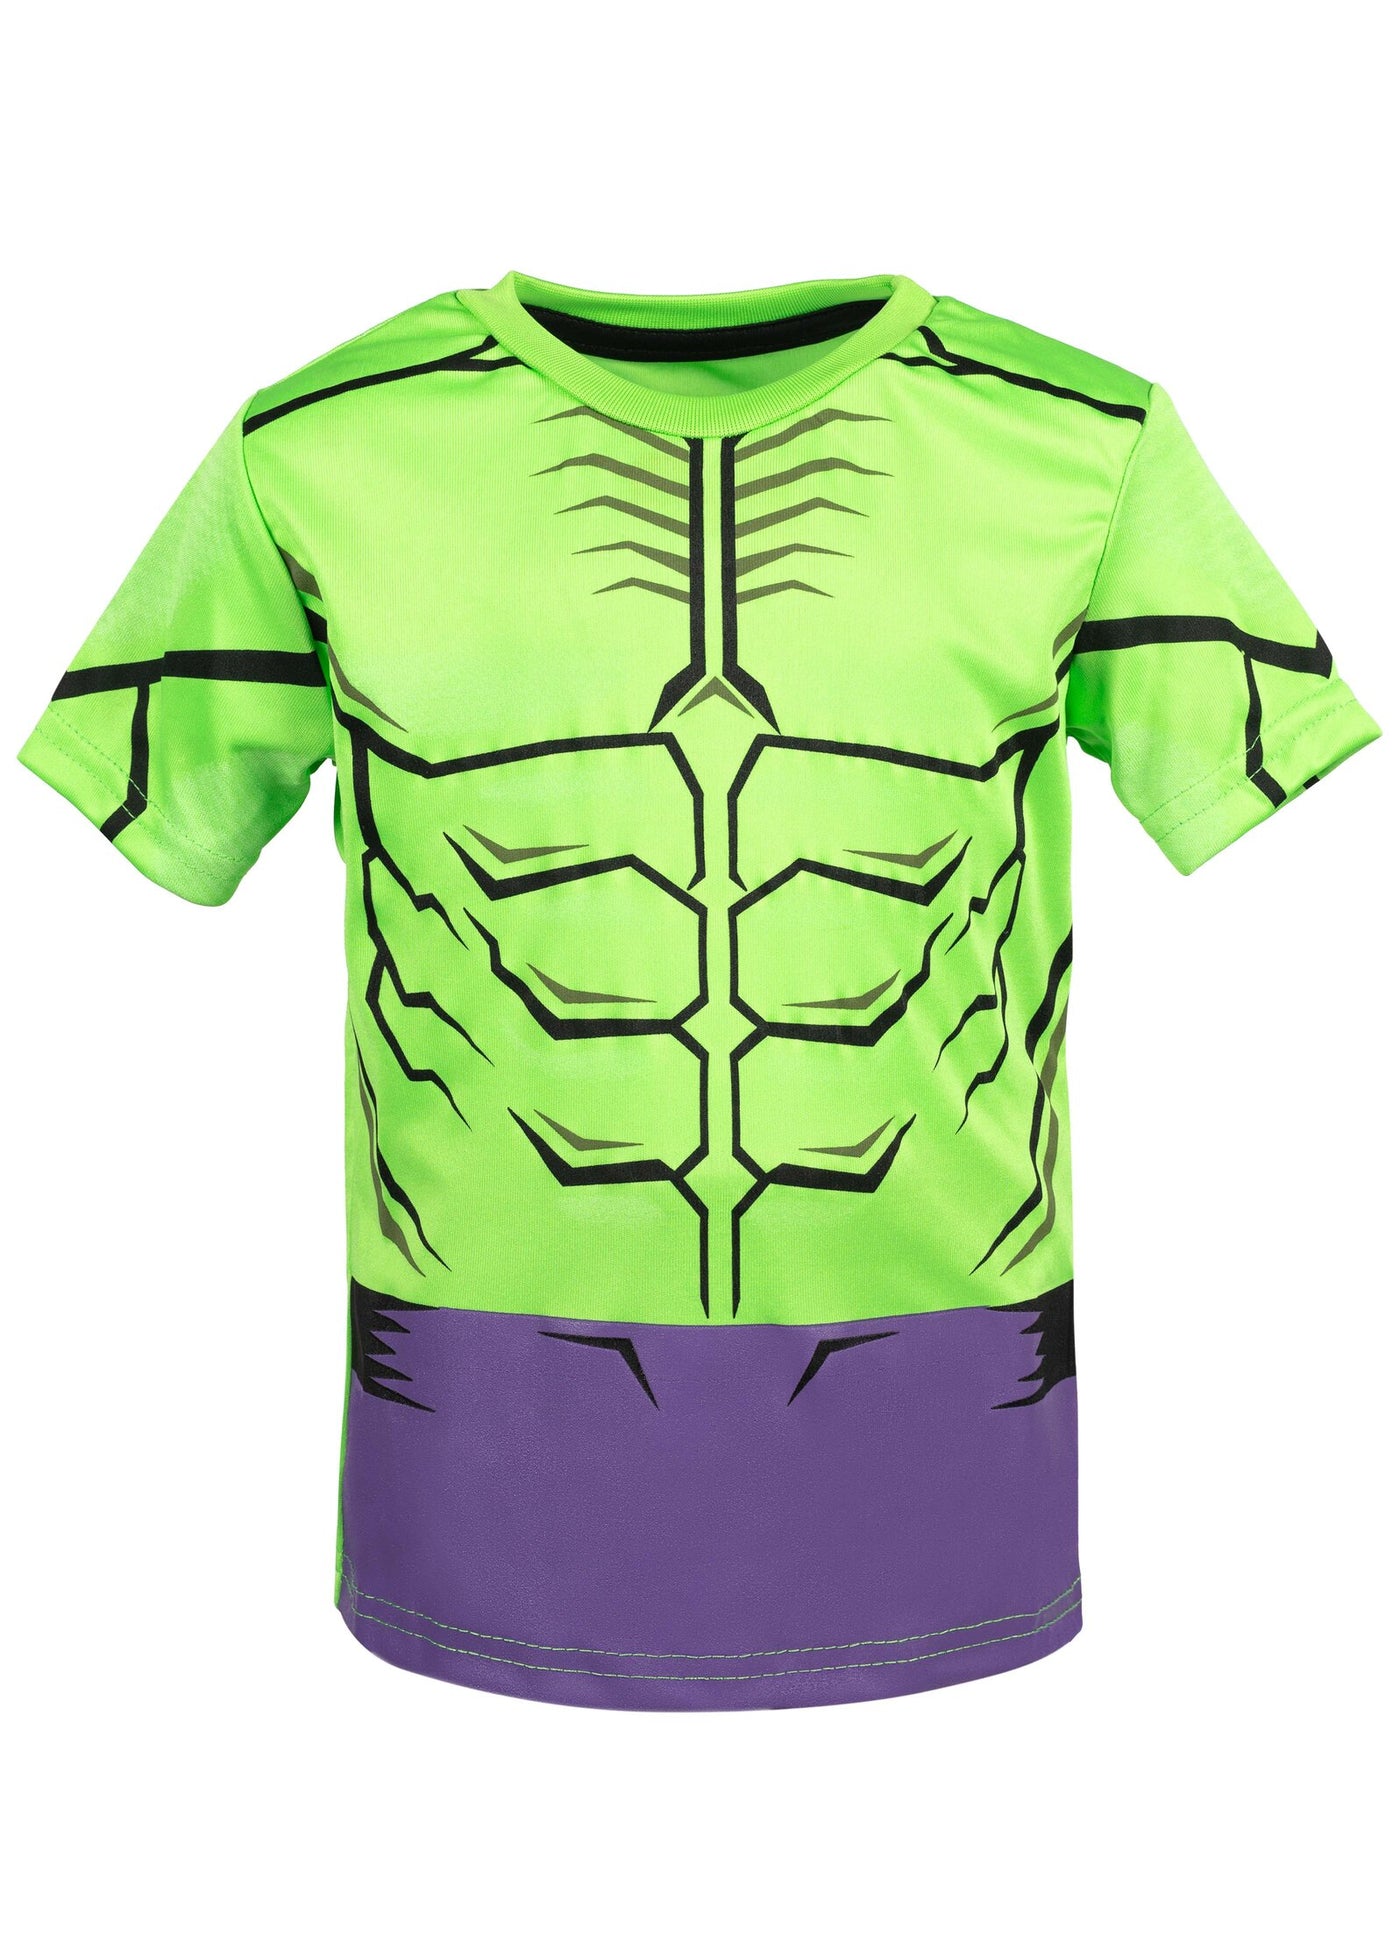 Marvel Avengers The Hulk T-Shirt and Shorts Outfit Set